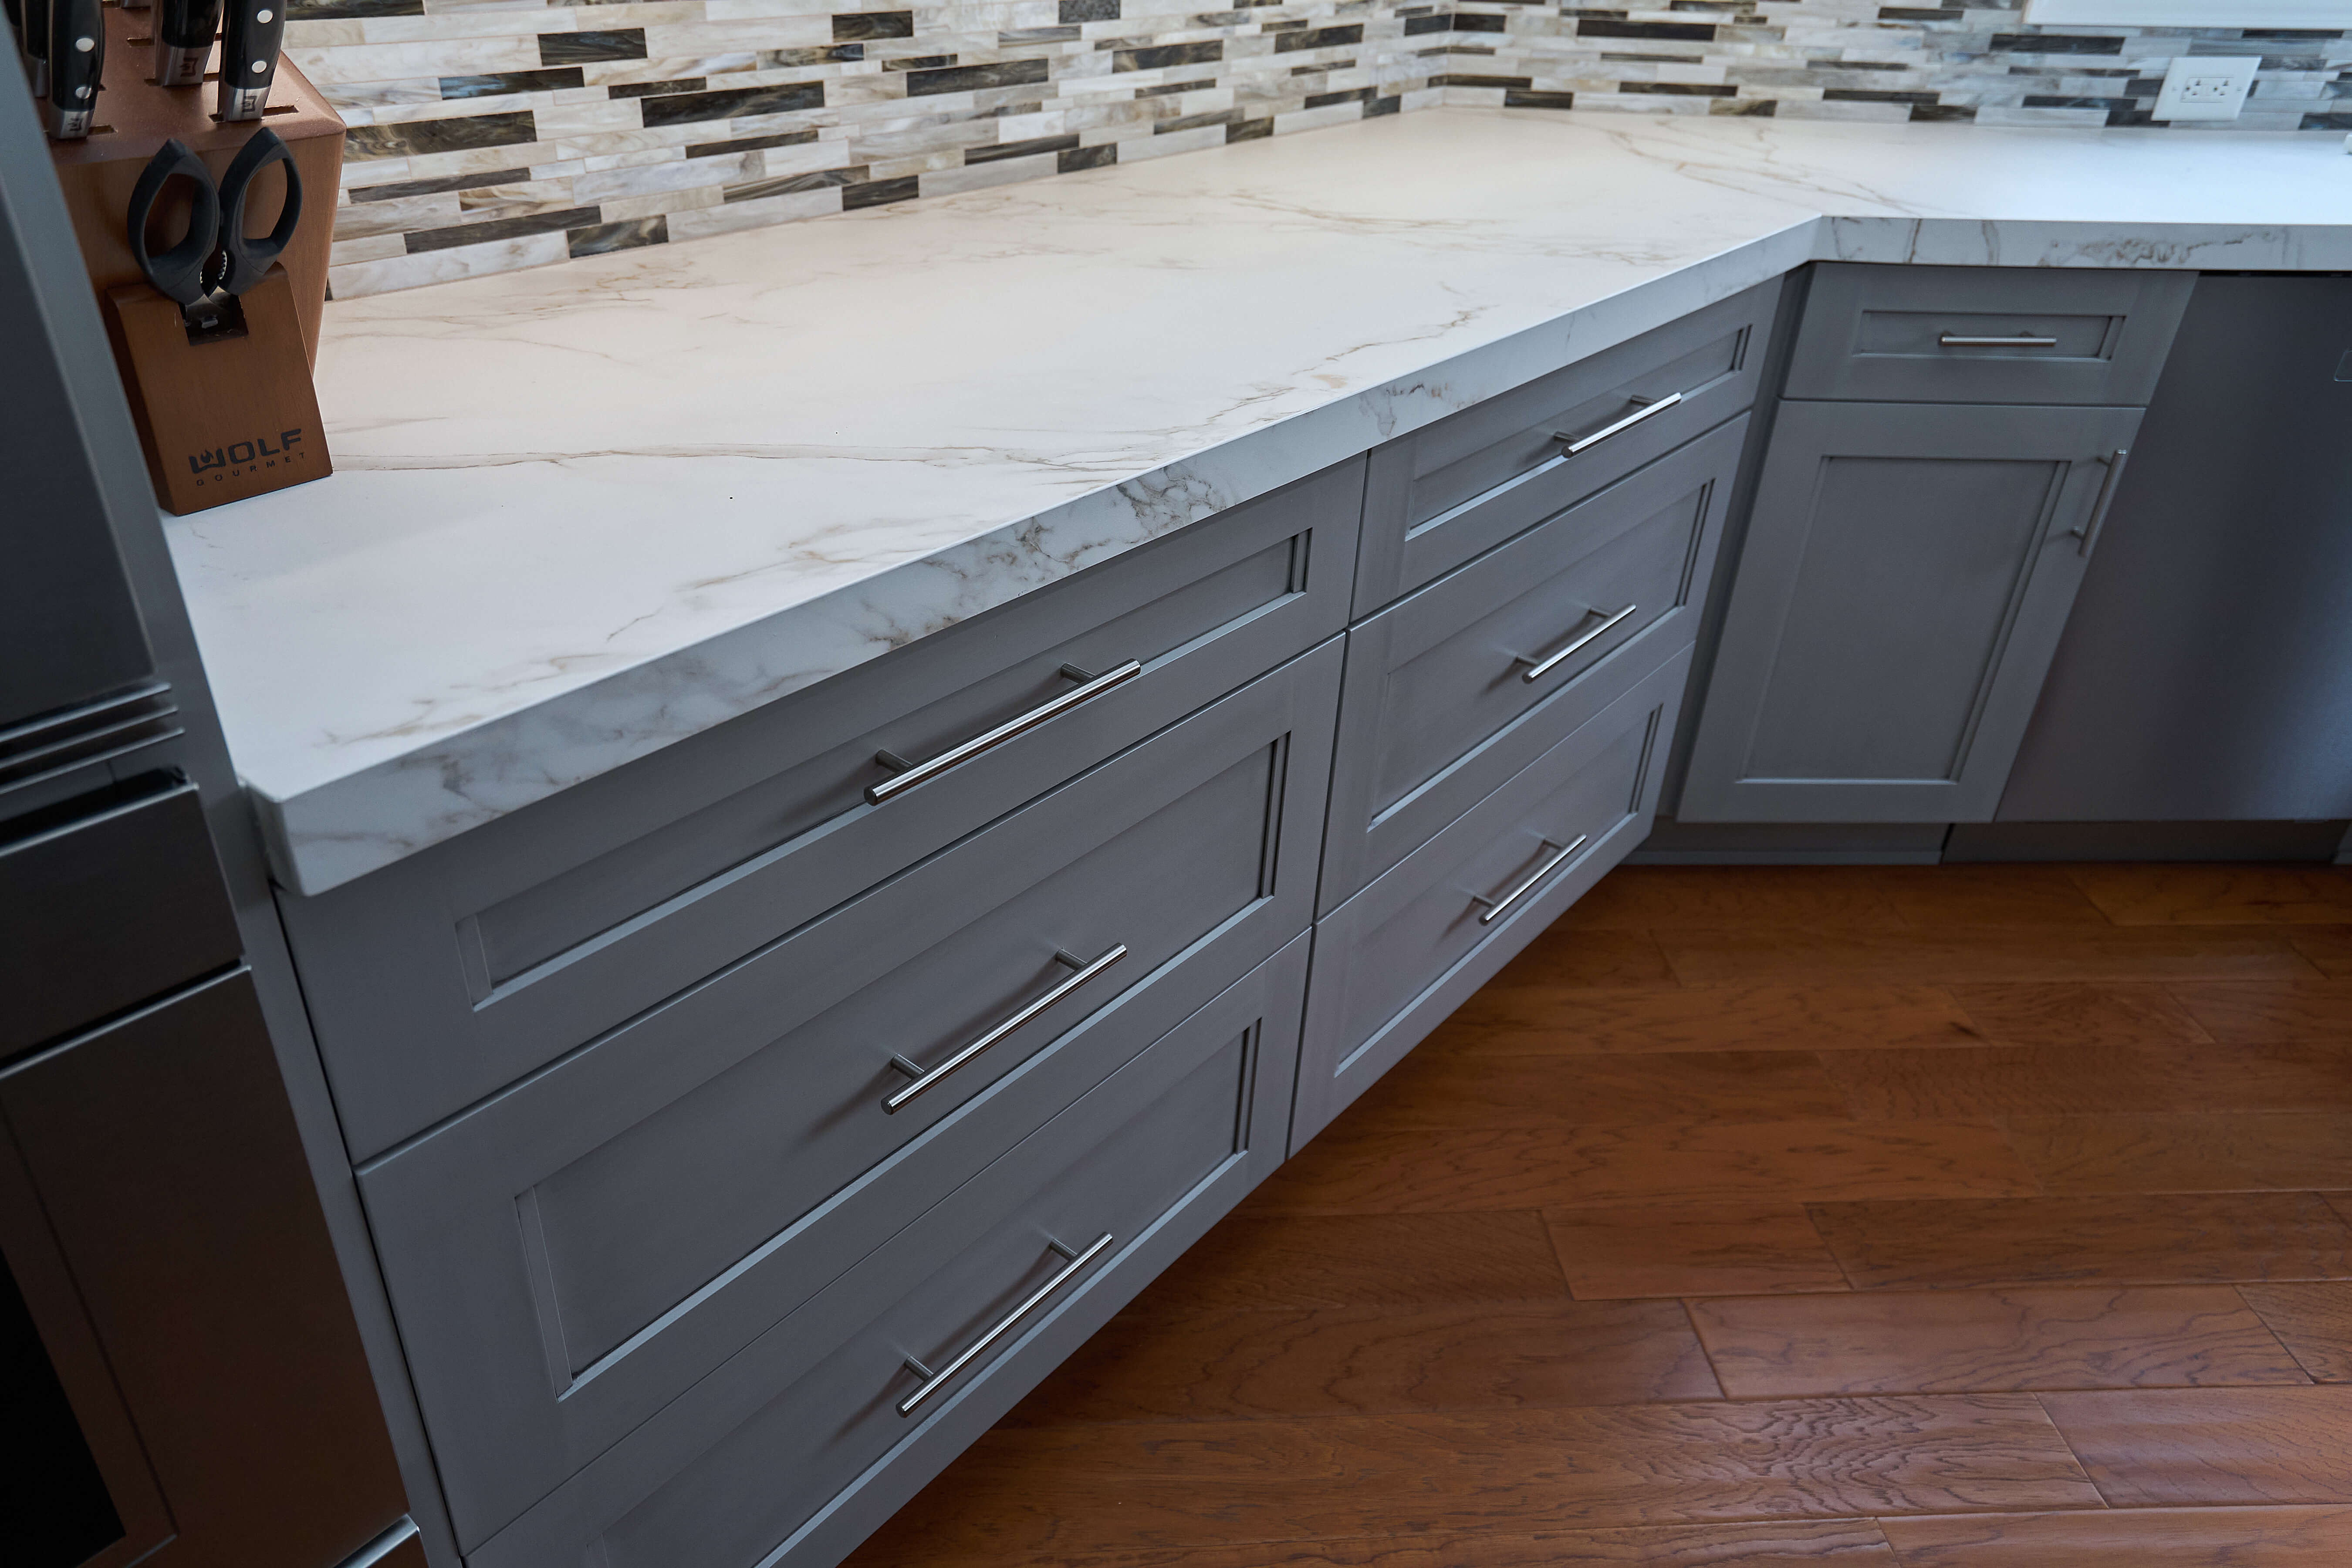 A close up of the gray painted base cabinets in a transitional styled kitchen.